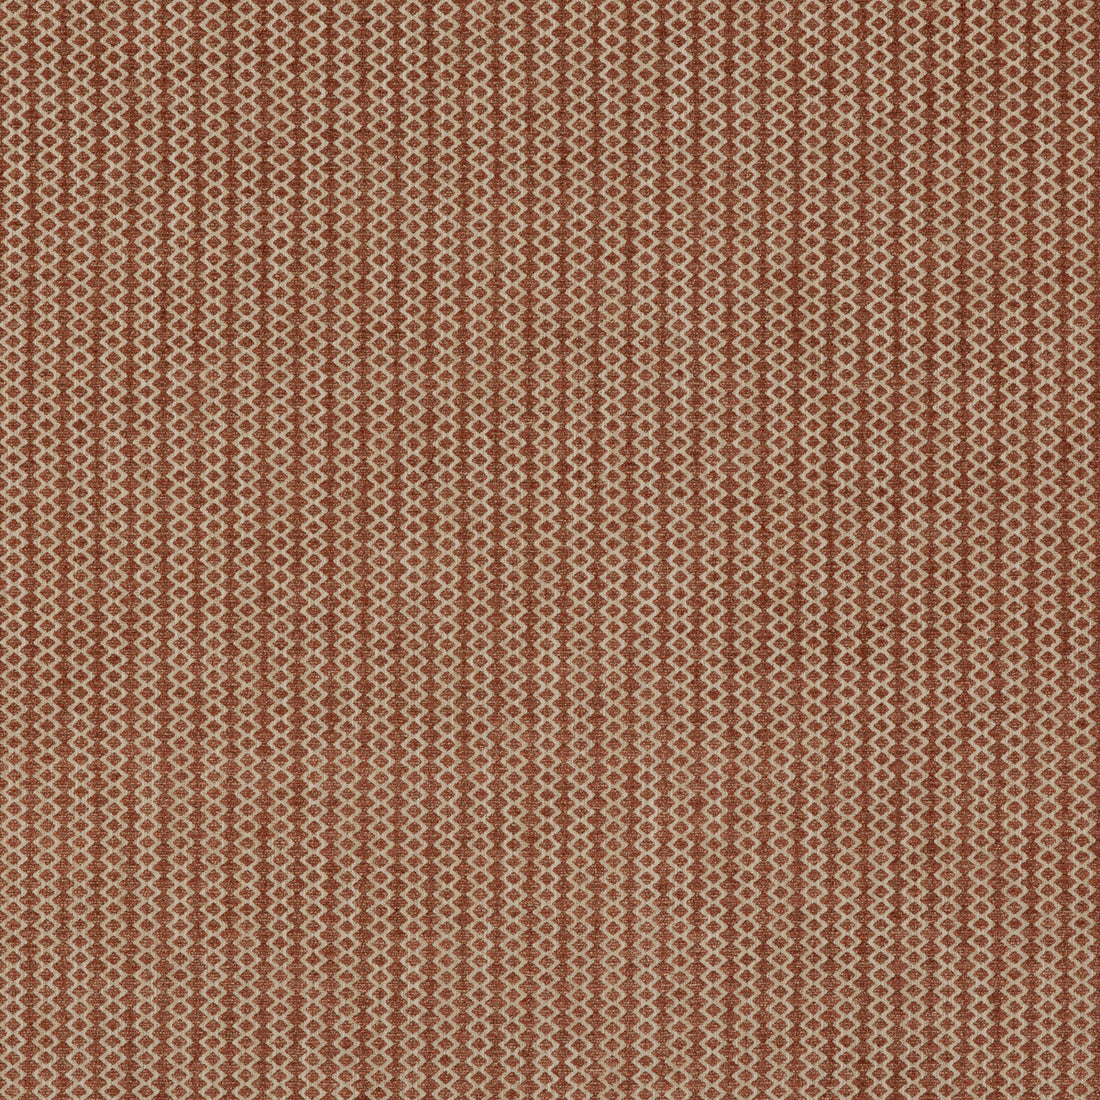 Harwood fabric in tomato color - pattern BF10958.450.0 - by G P &amp; J Baker in the Baker House Textures collection